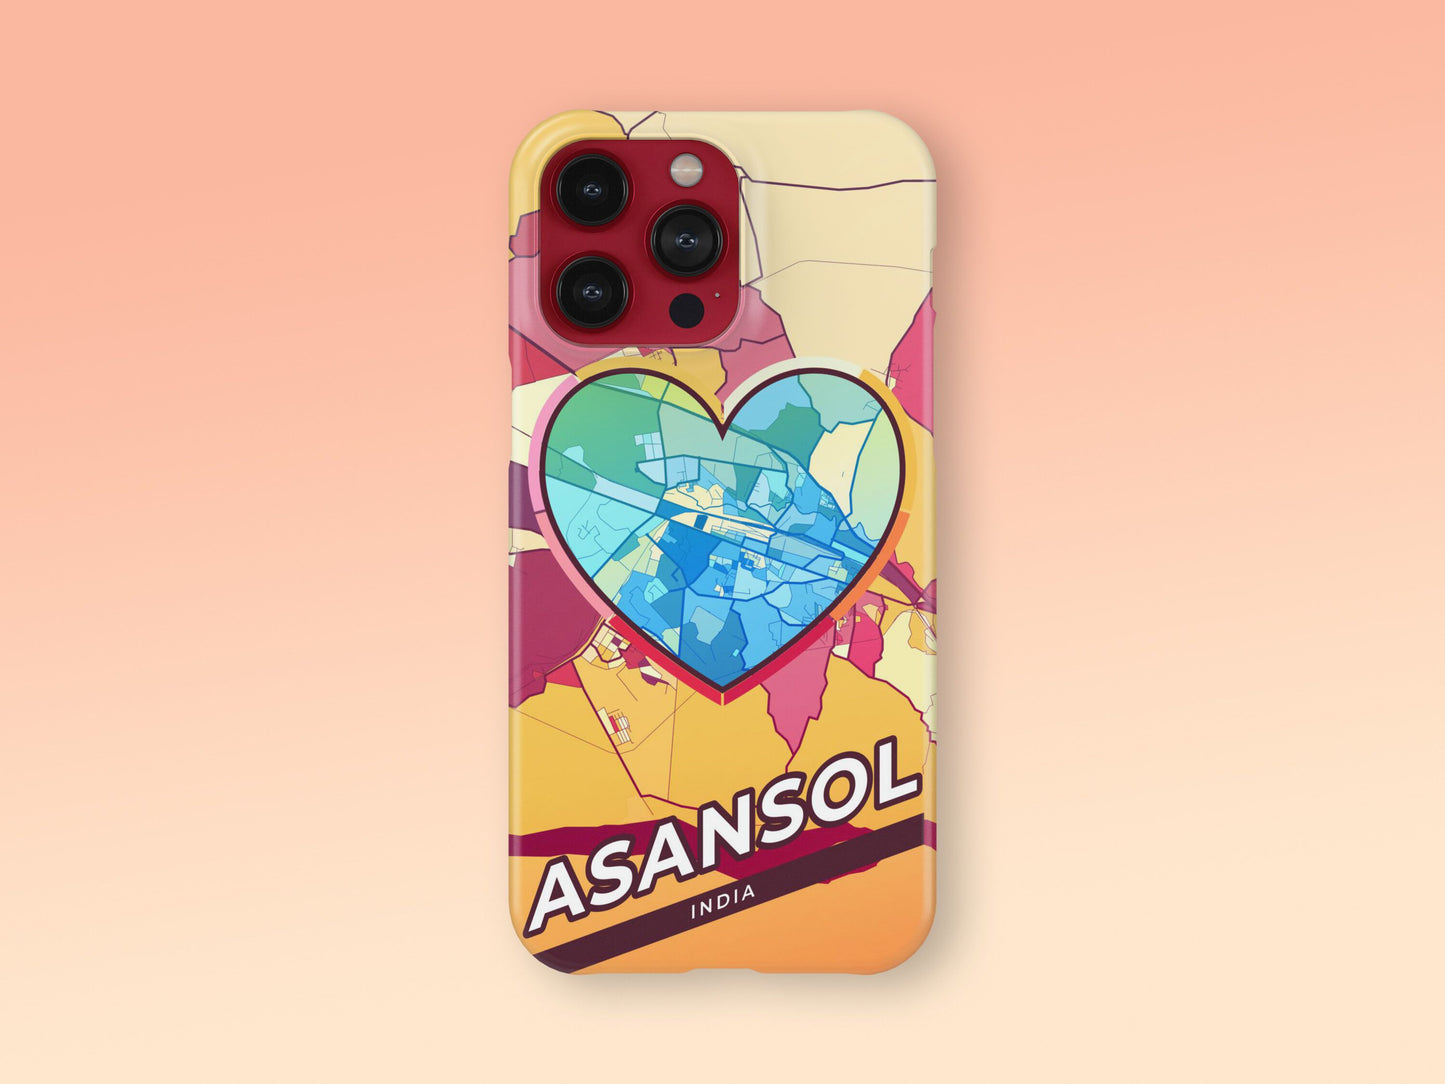 Asansol India slim phone case with colorful icon. Birthday, wedding or housewarming gift. Couple match cases. 2